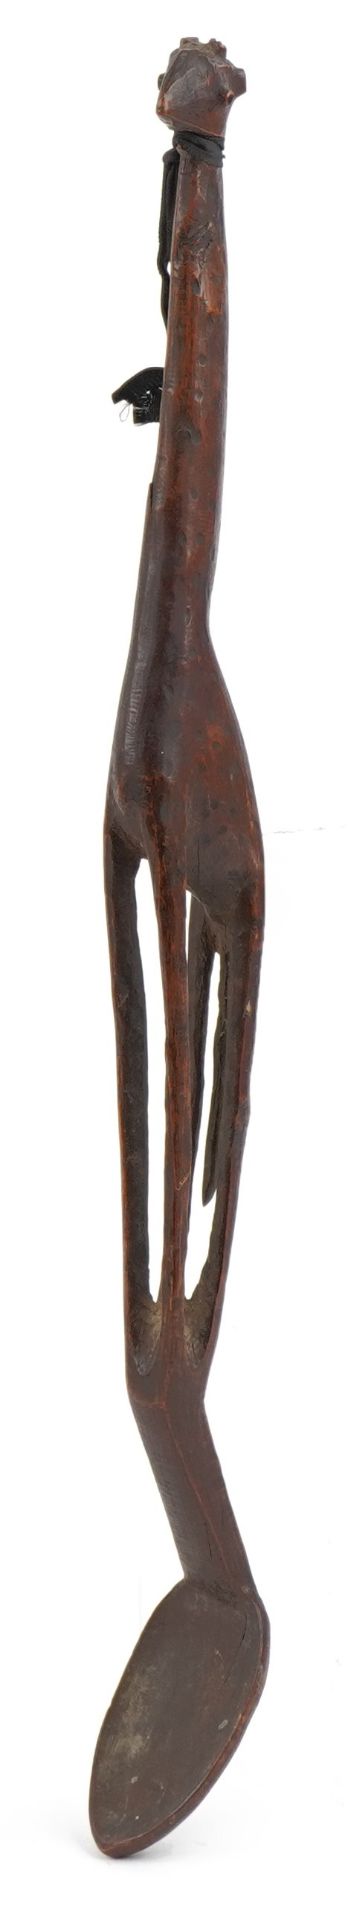 Large tribal interest treen spoon carved with a giraffe, 55cm in length : For further information on